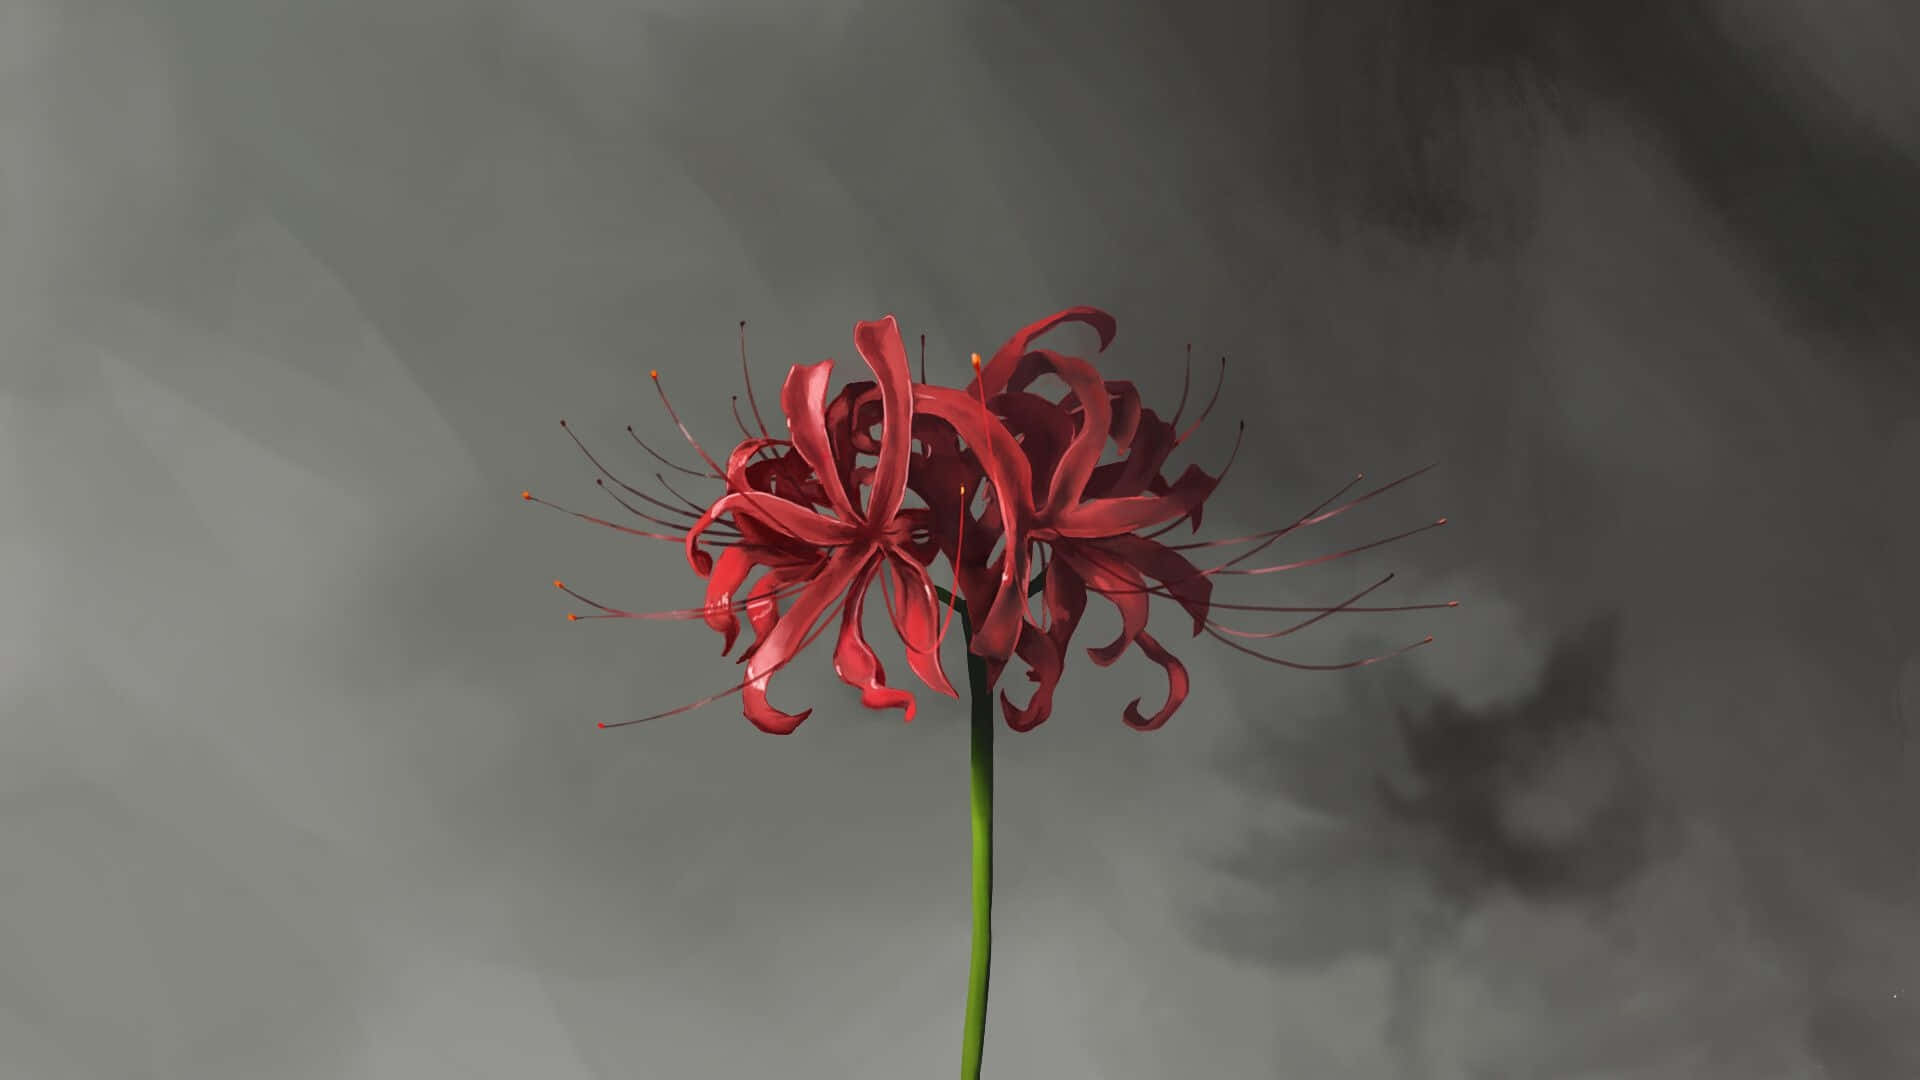 Ｄｅｍｏ Ａｎｉｍｅ - Japan's flower of death | Red spider lily | Facebook